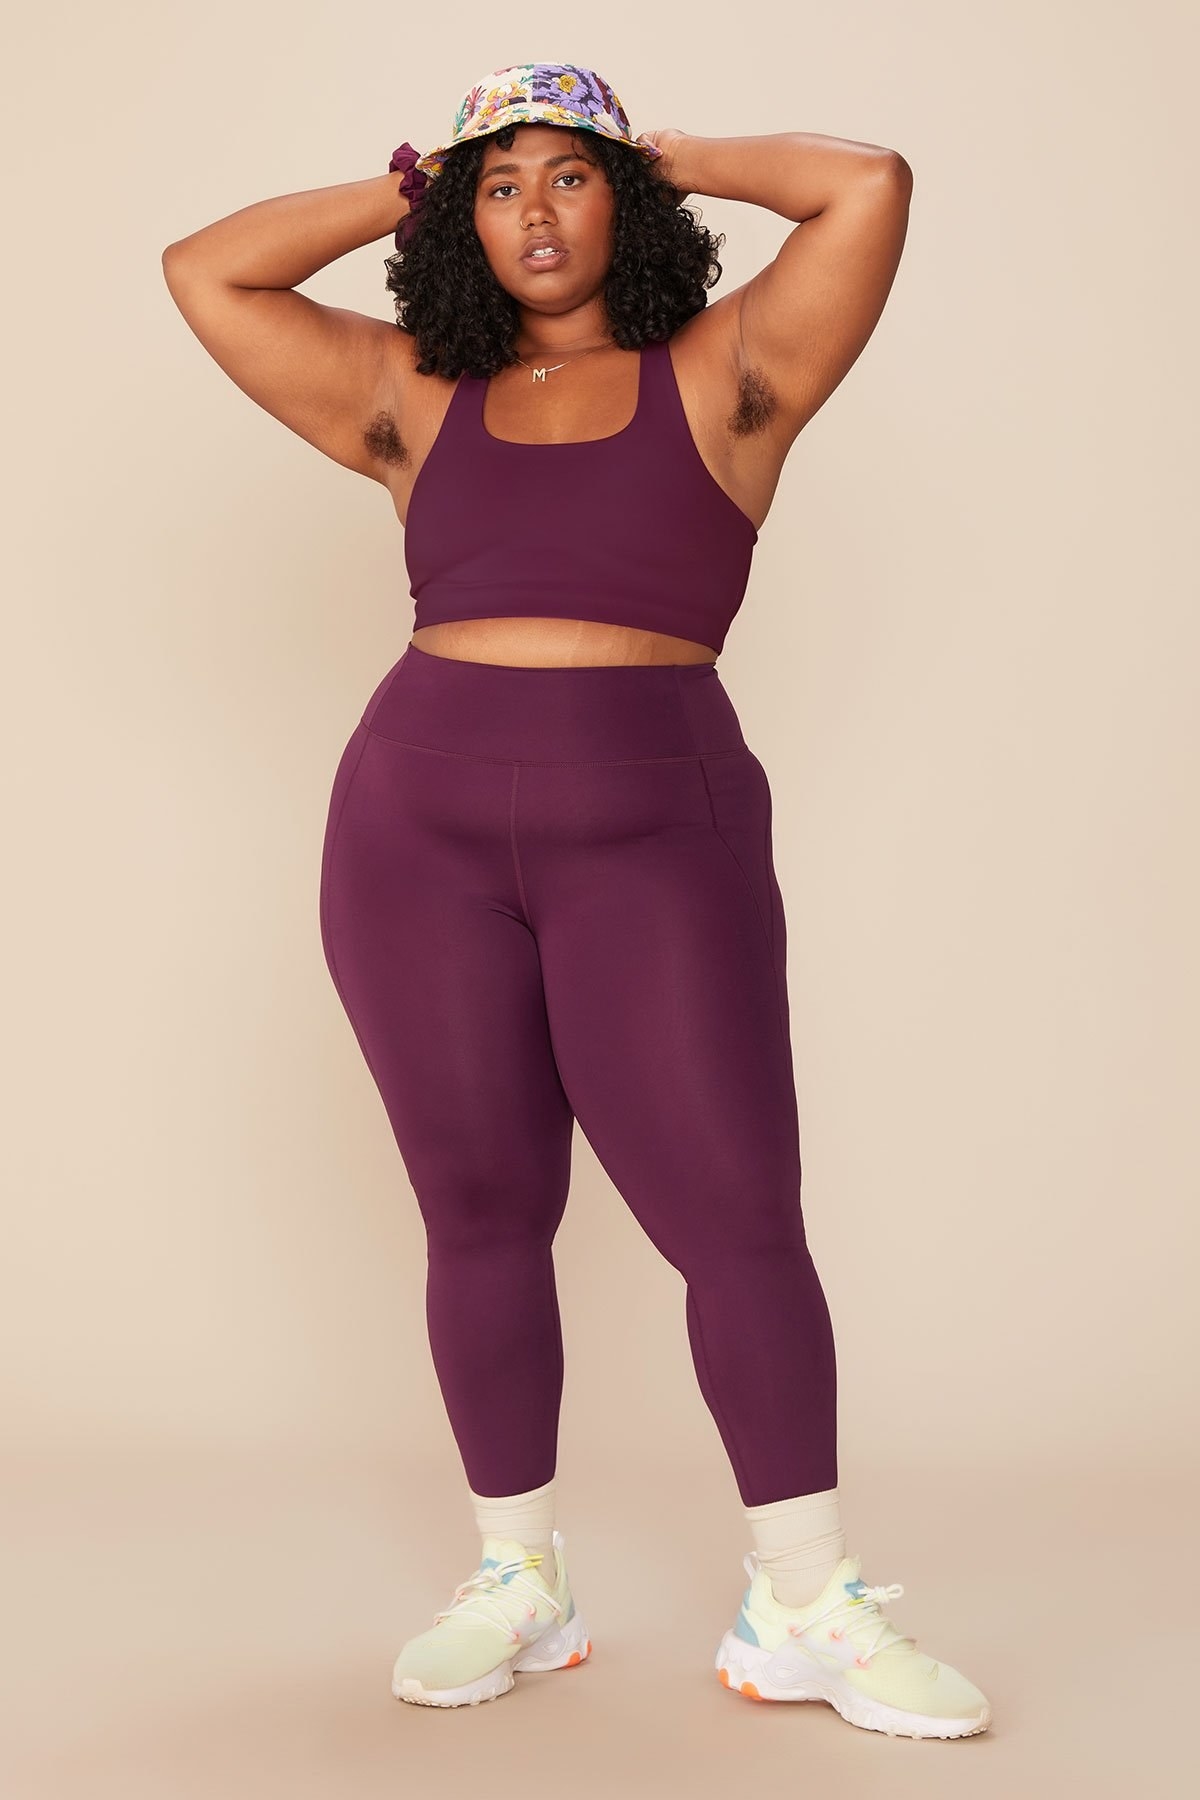 People Are Obsessed With These High-Waist Leggings From Amazon